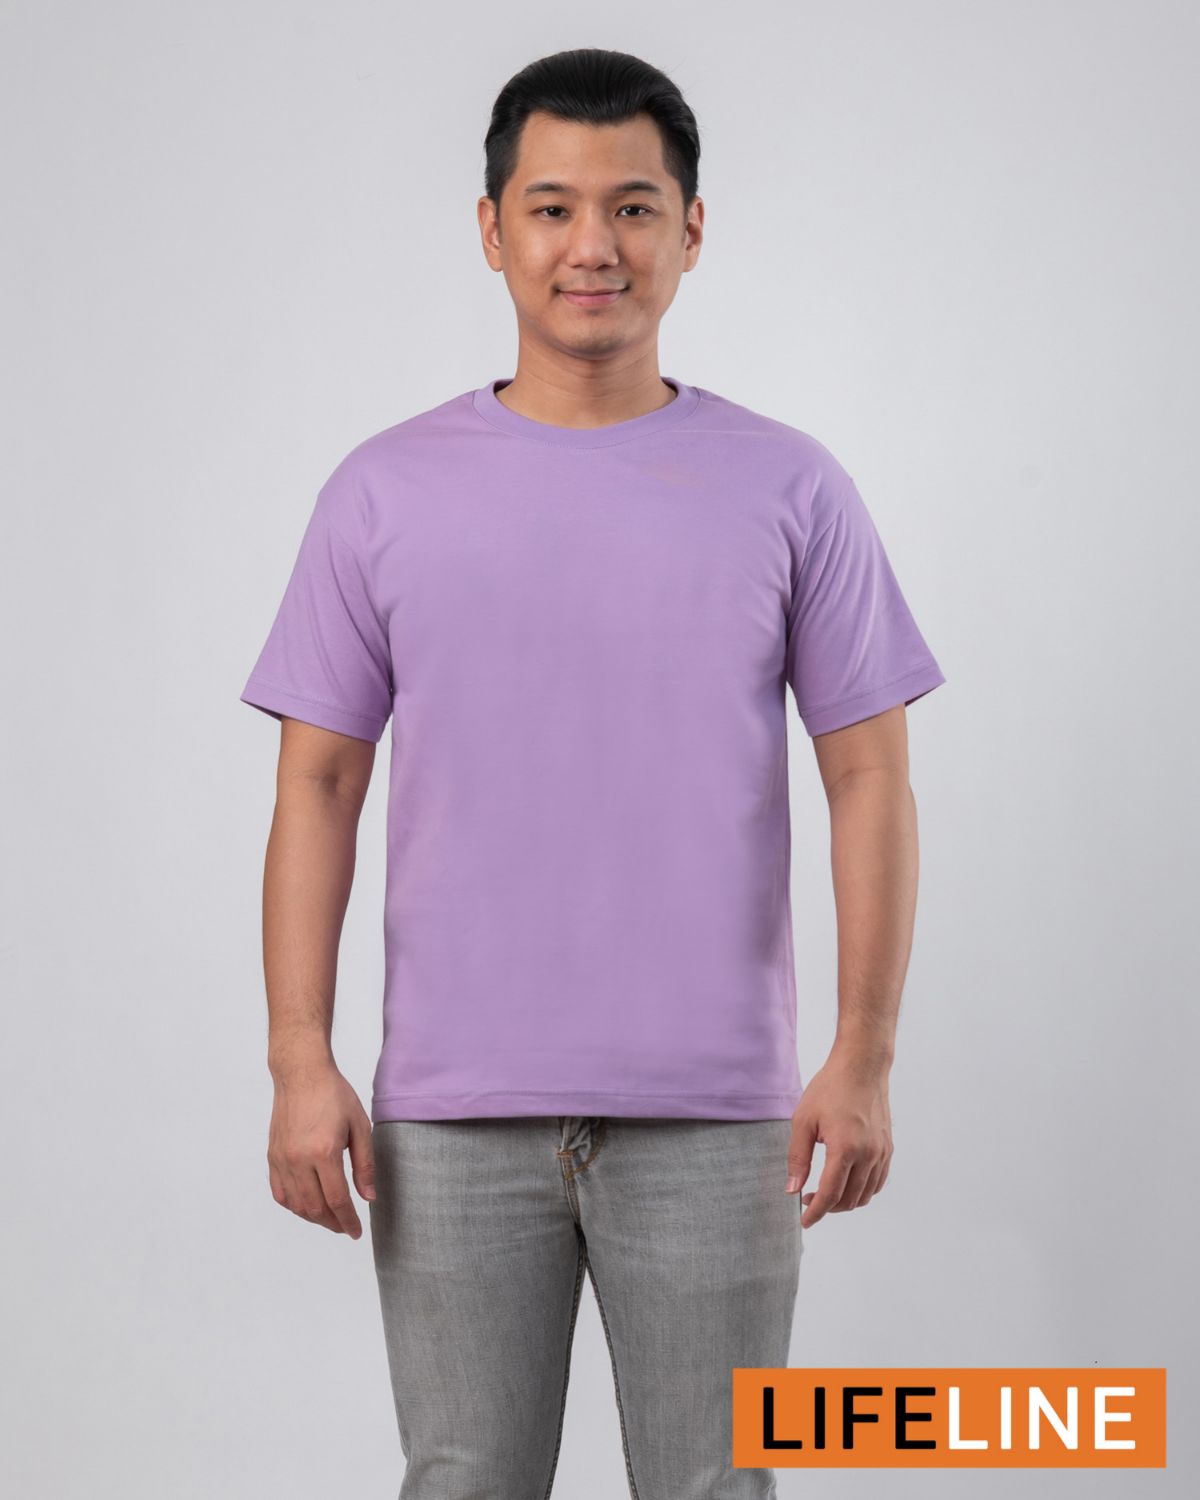 Cotton t-shirts are made from natural and sustainable fiber